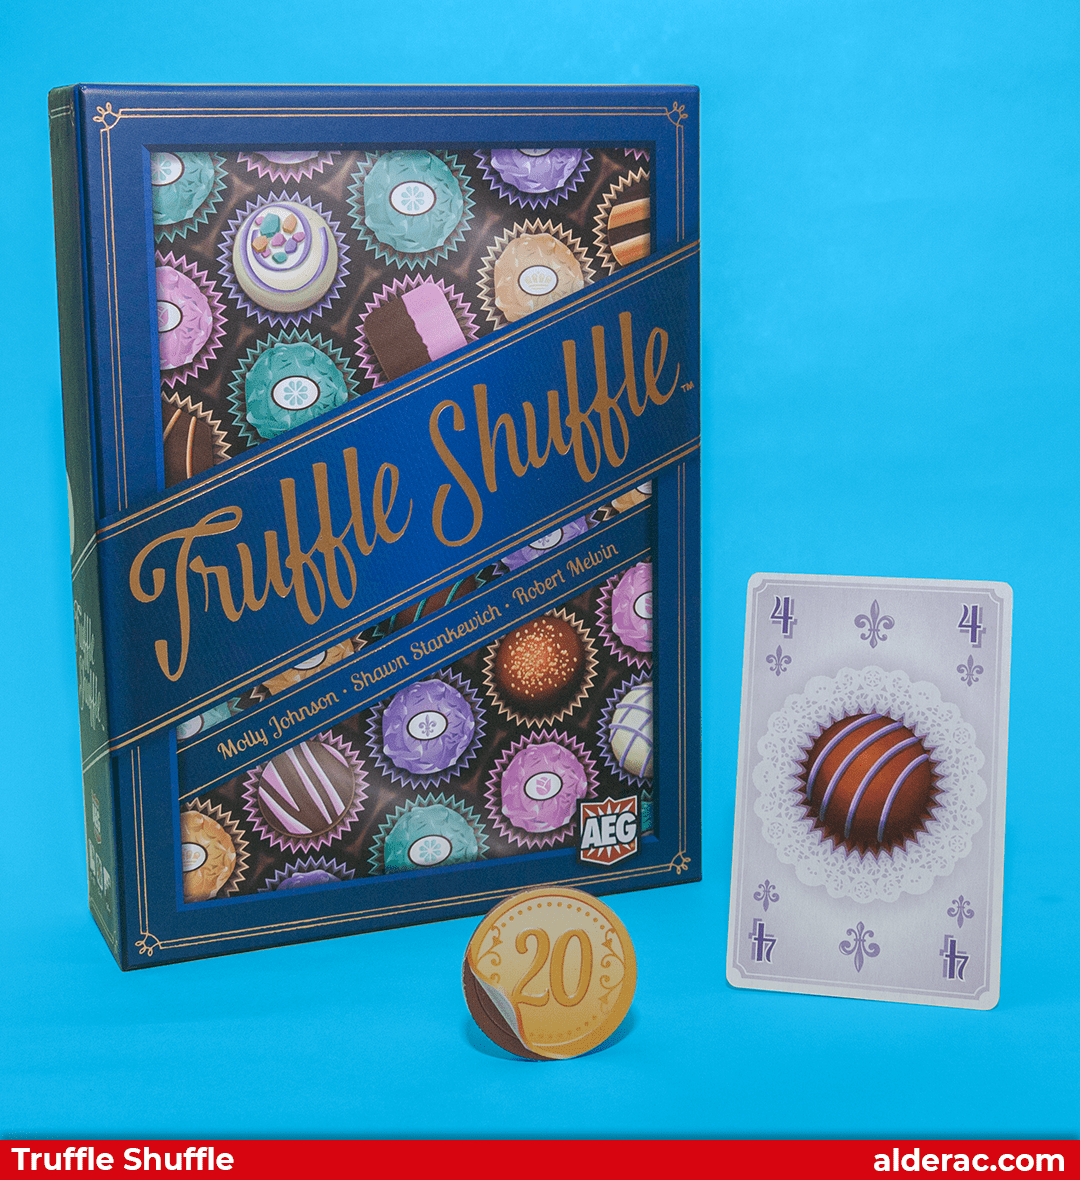 Truffle Shuffle box with a card and a coin